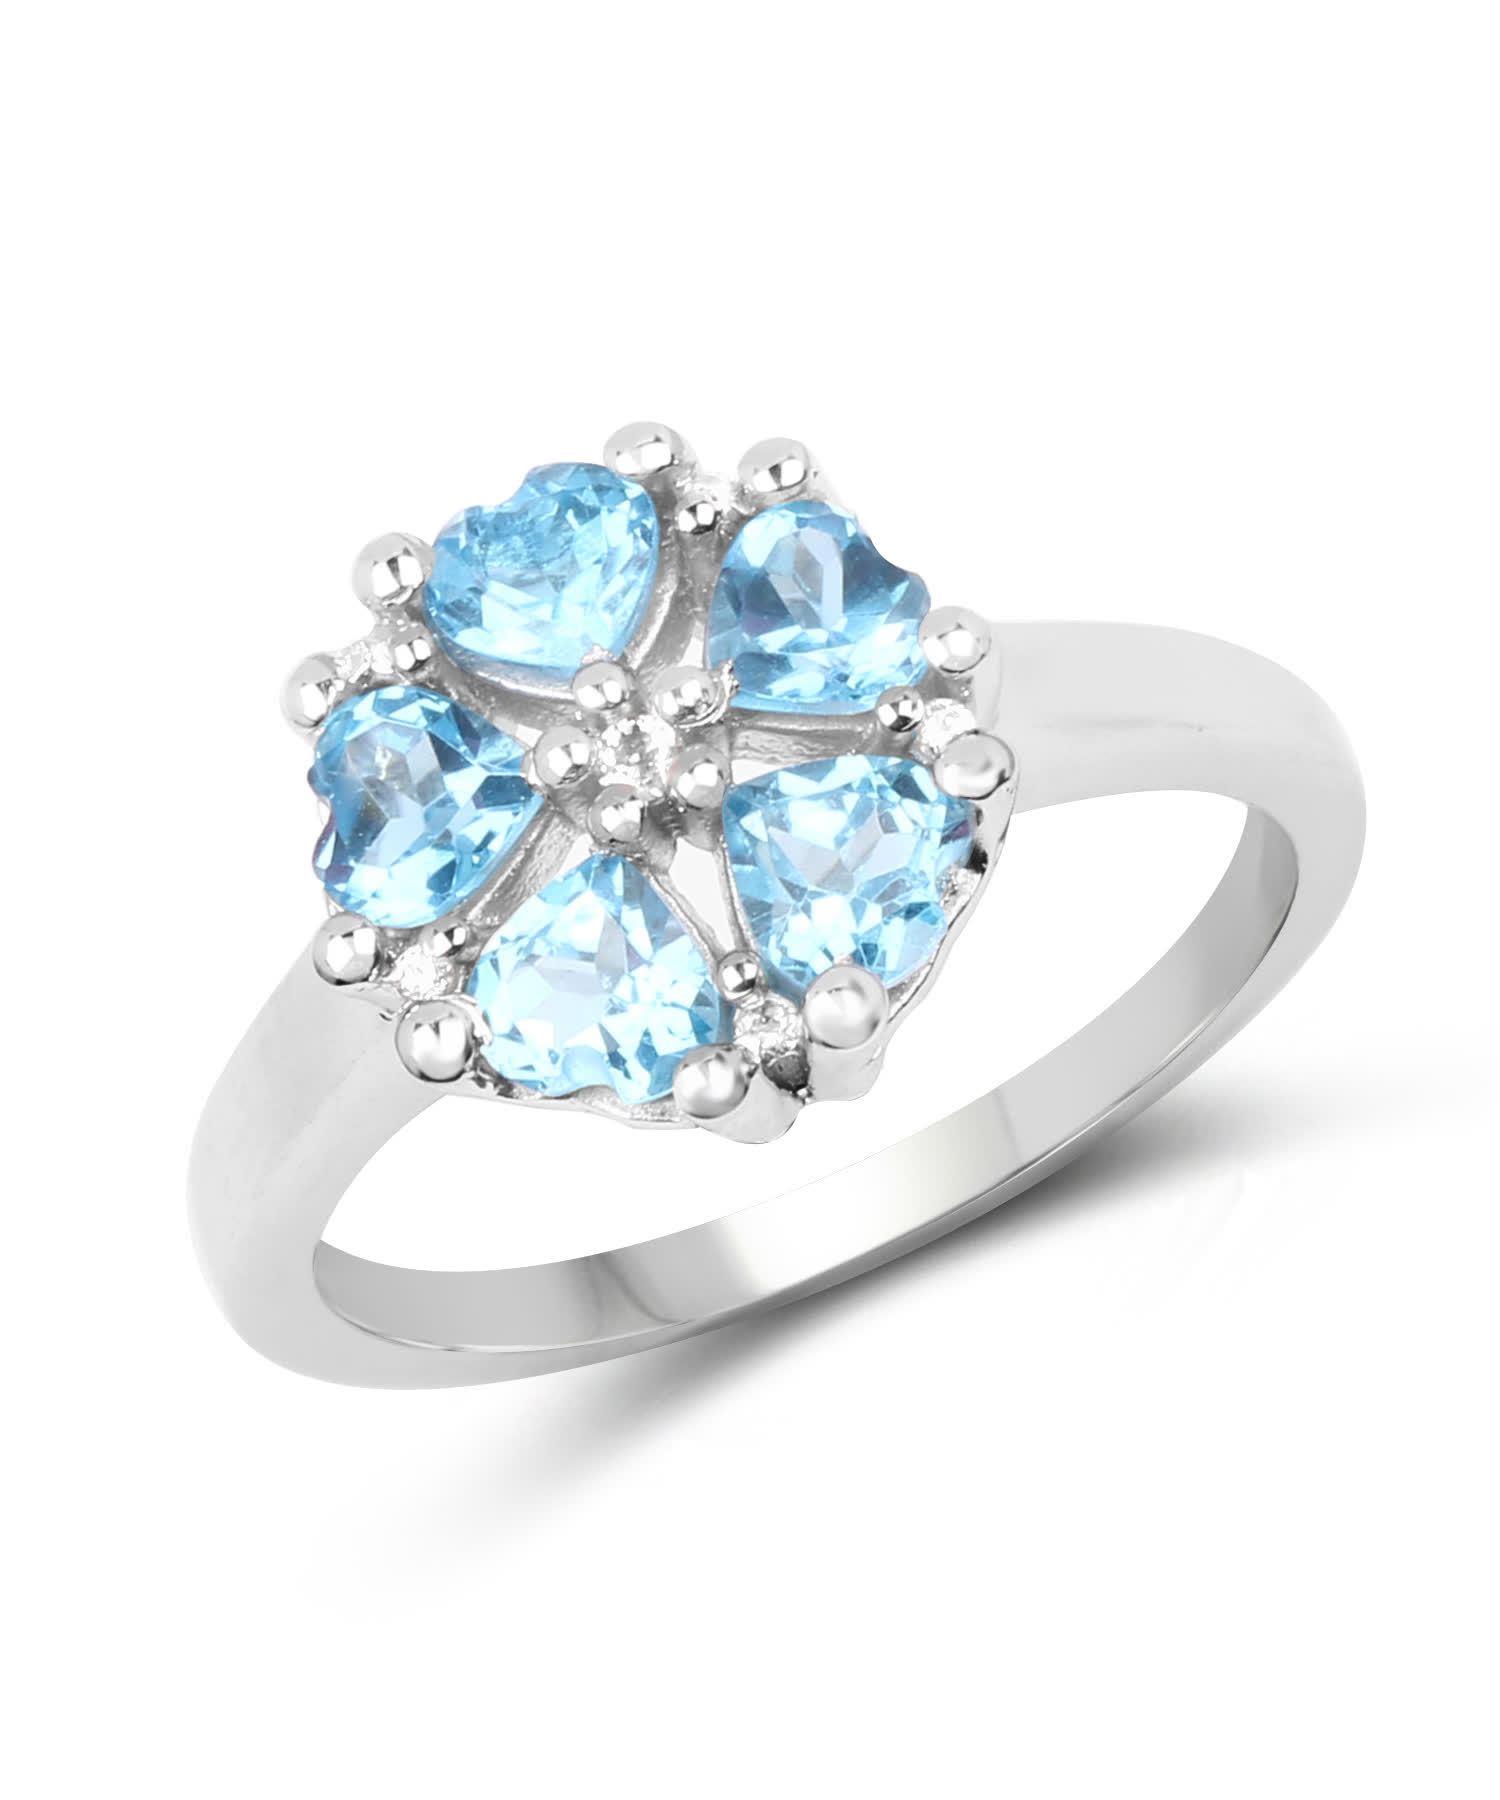 1.45ctw Natural Swiss Blue Topaz Rhodium Plated 925 Sterling Silver Heart Right Hand Ring View 1